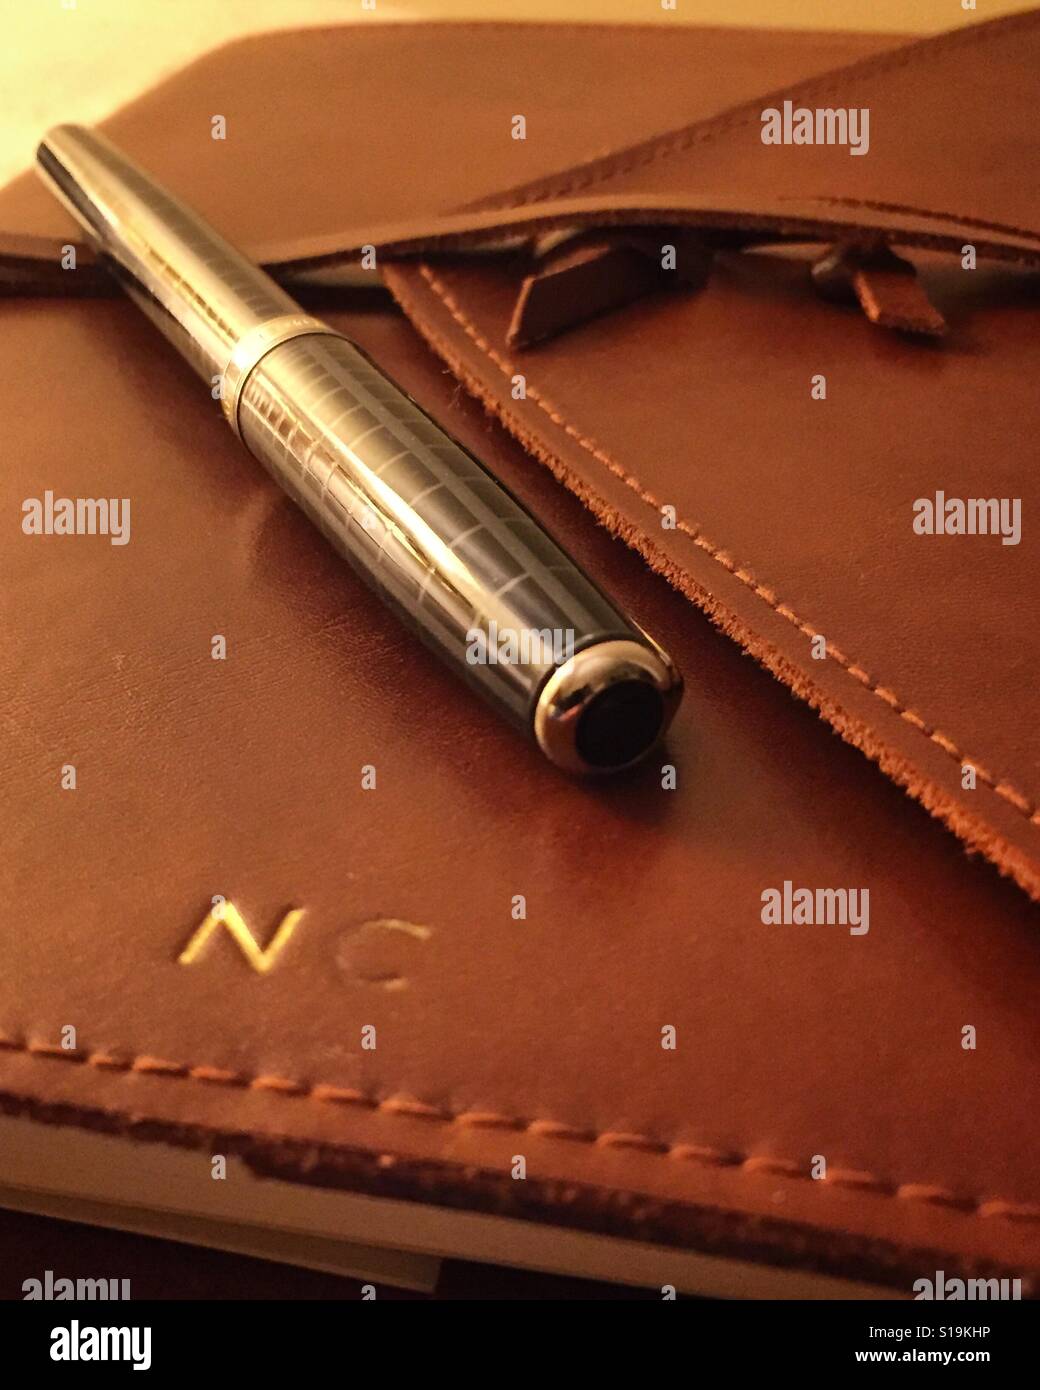 Pen and leather journal. Stock Photo